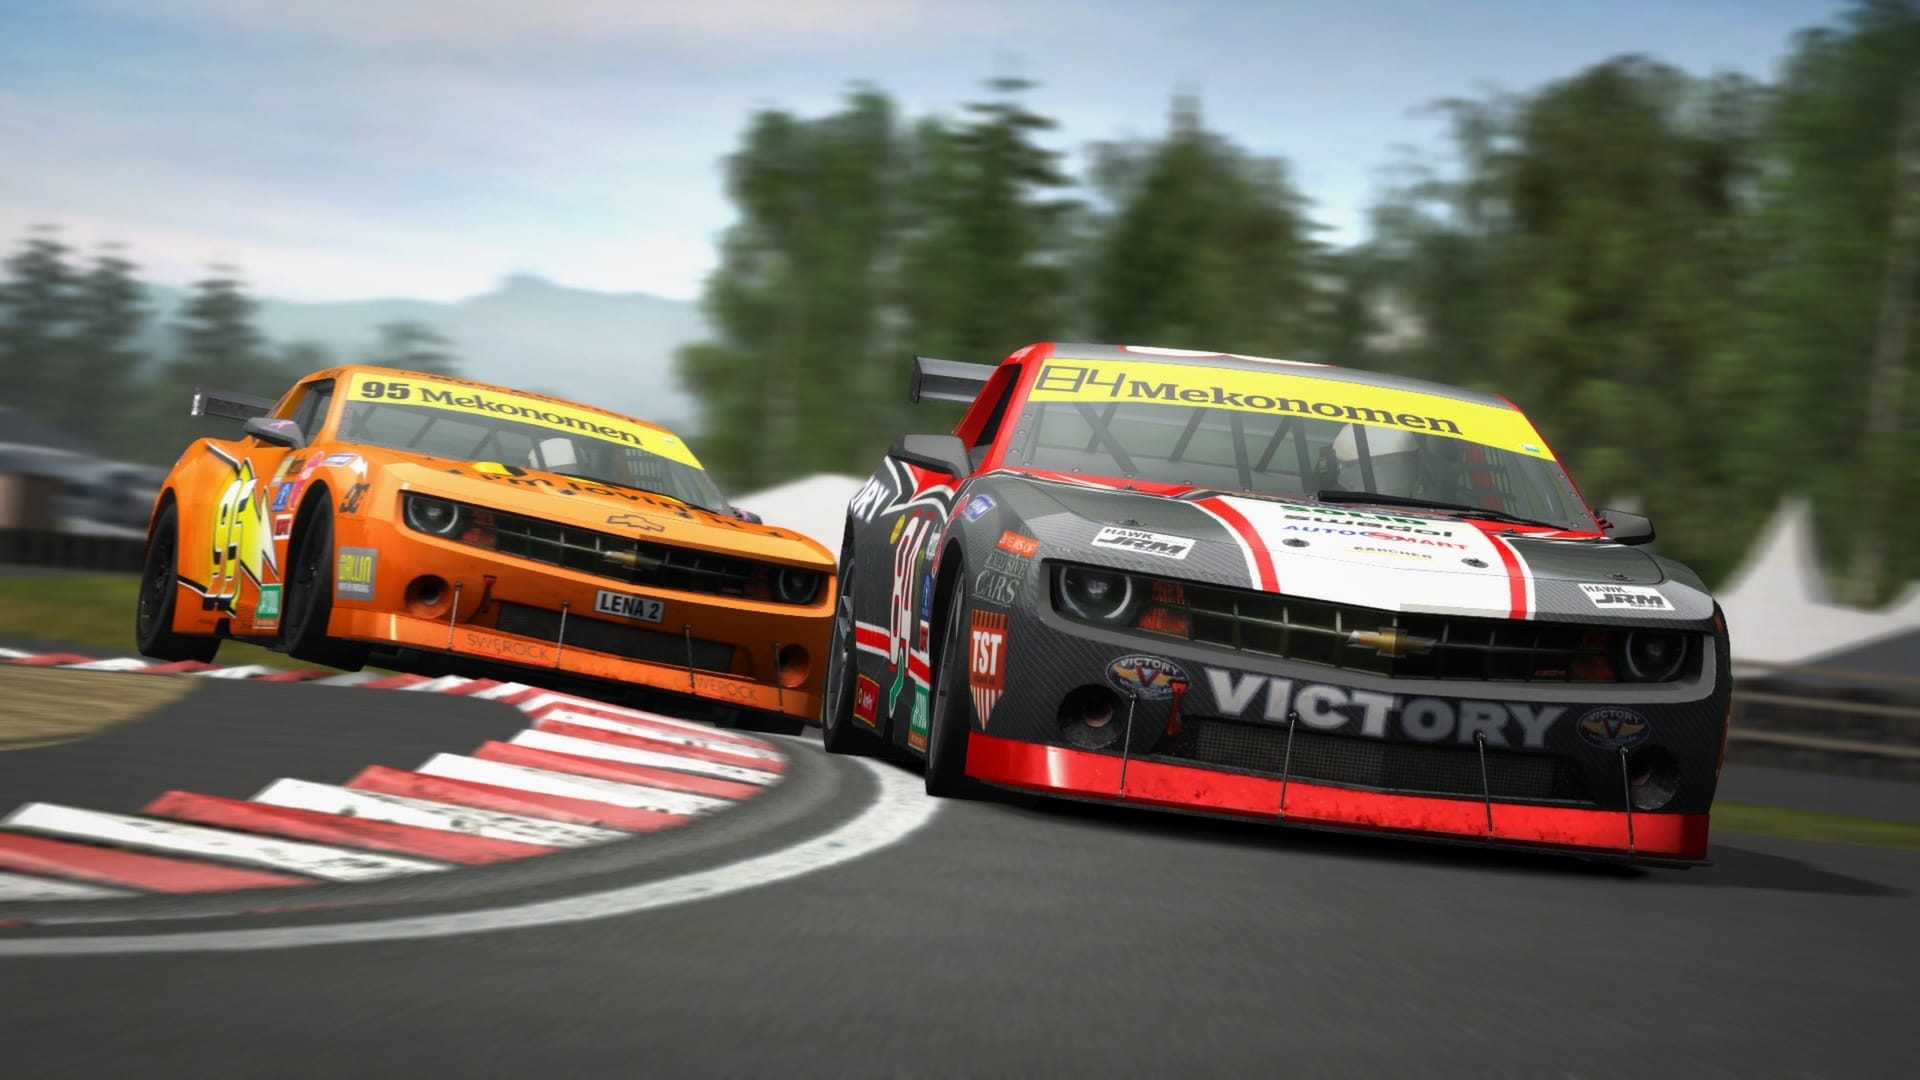 The 20 best racing games to play in 2022